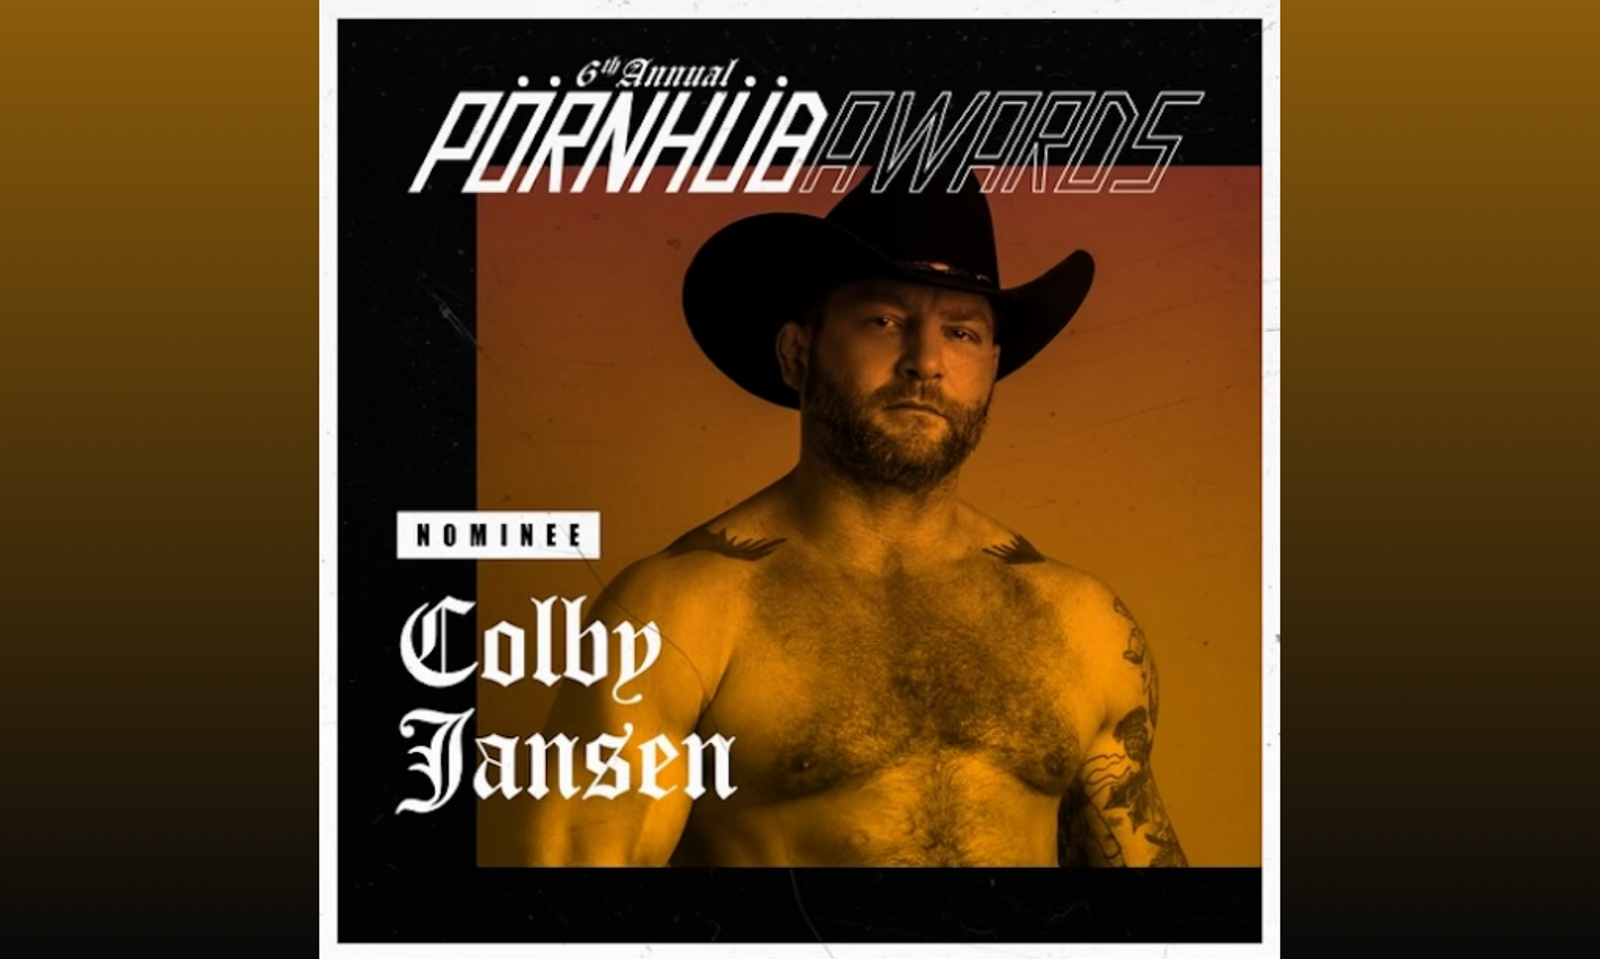 Colby Jansen Nominated for 2024 Pornhub Top Daddy Performer Award